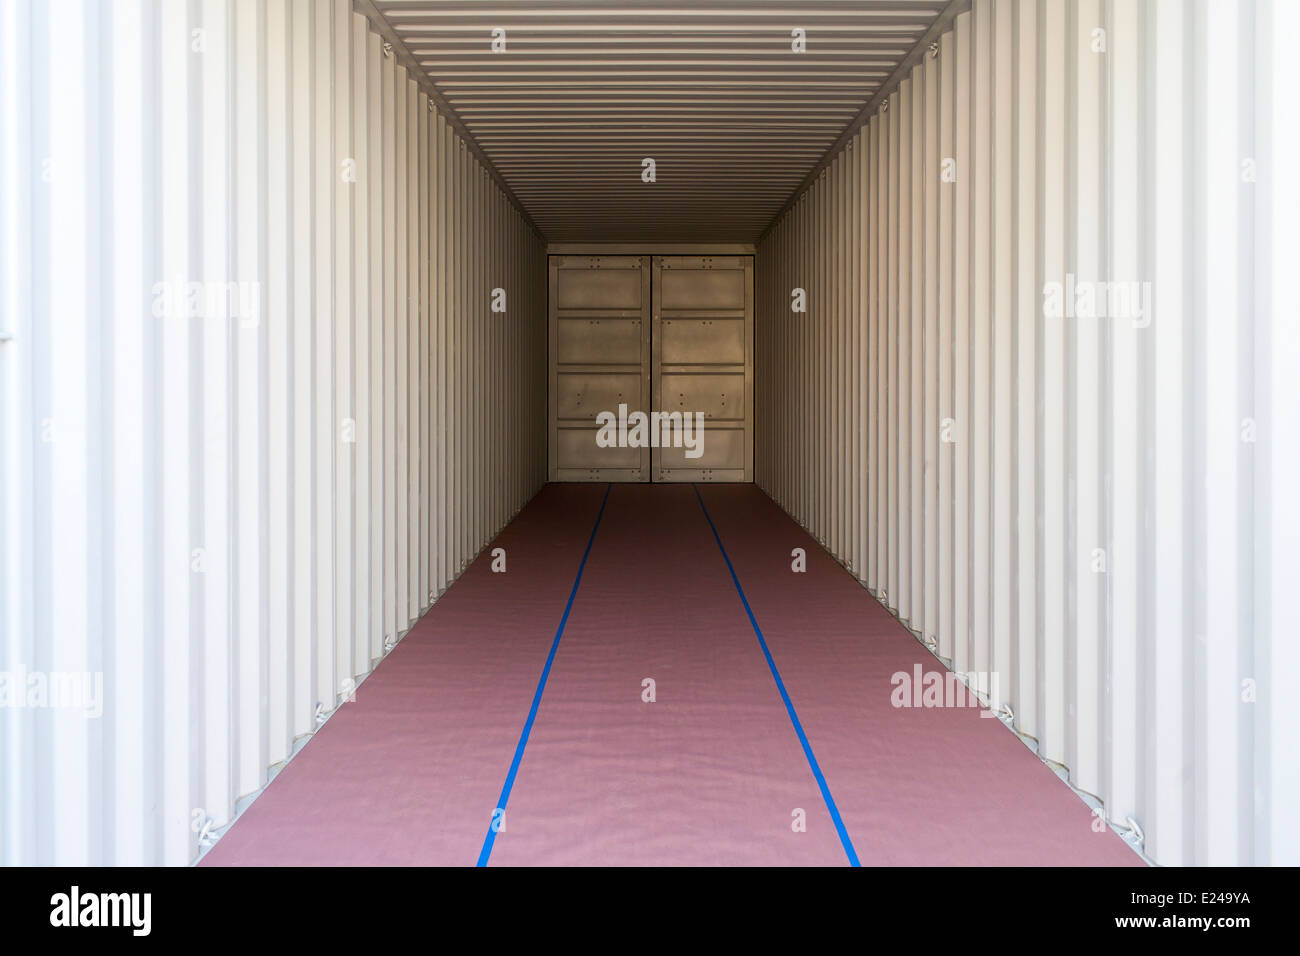 A symmetrical image of the interior of a standard cargo shipping container. The floor is covered with protective paper. Stock Photo